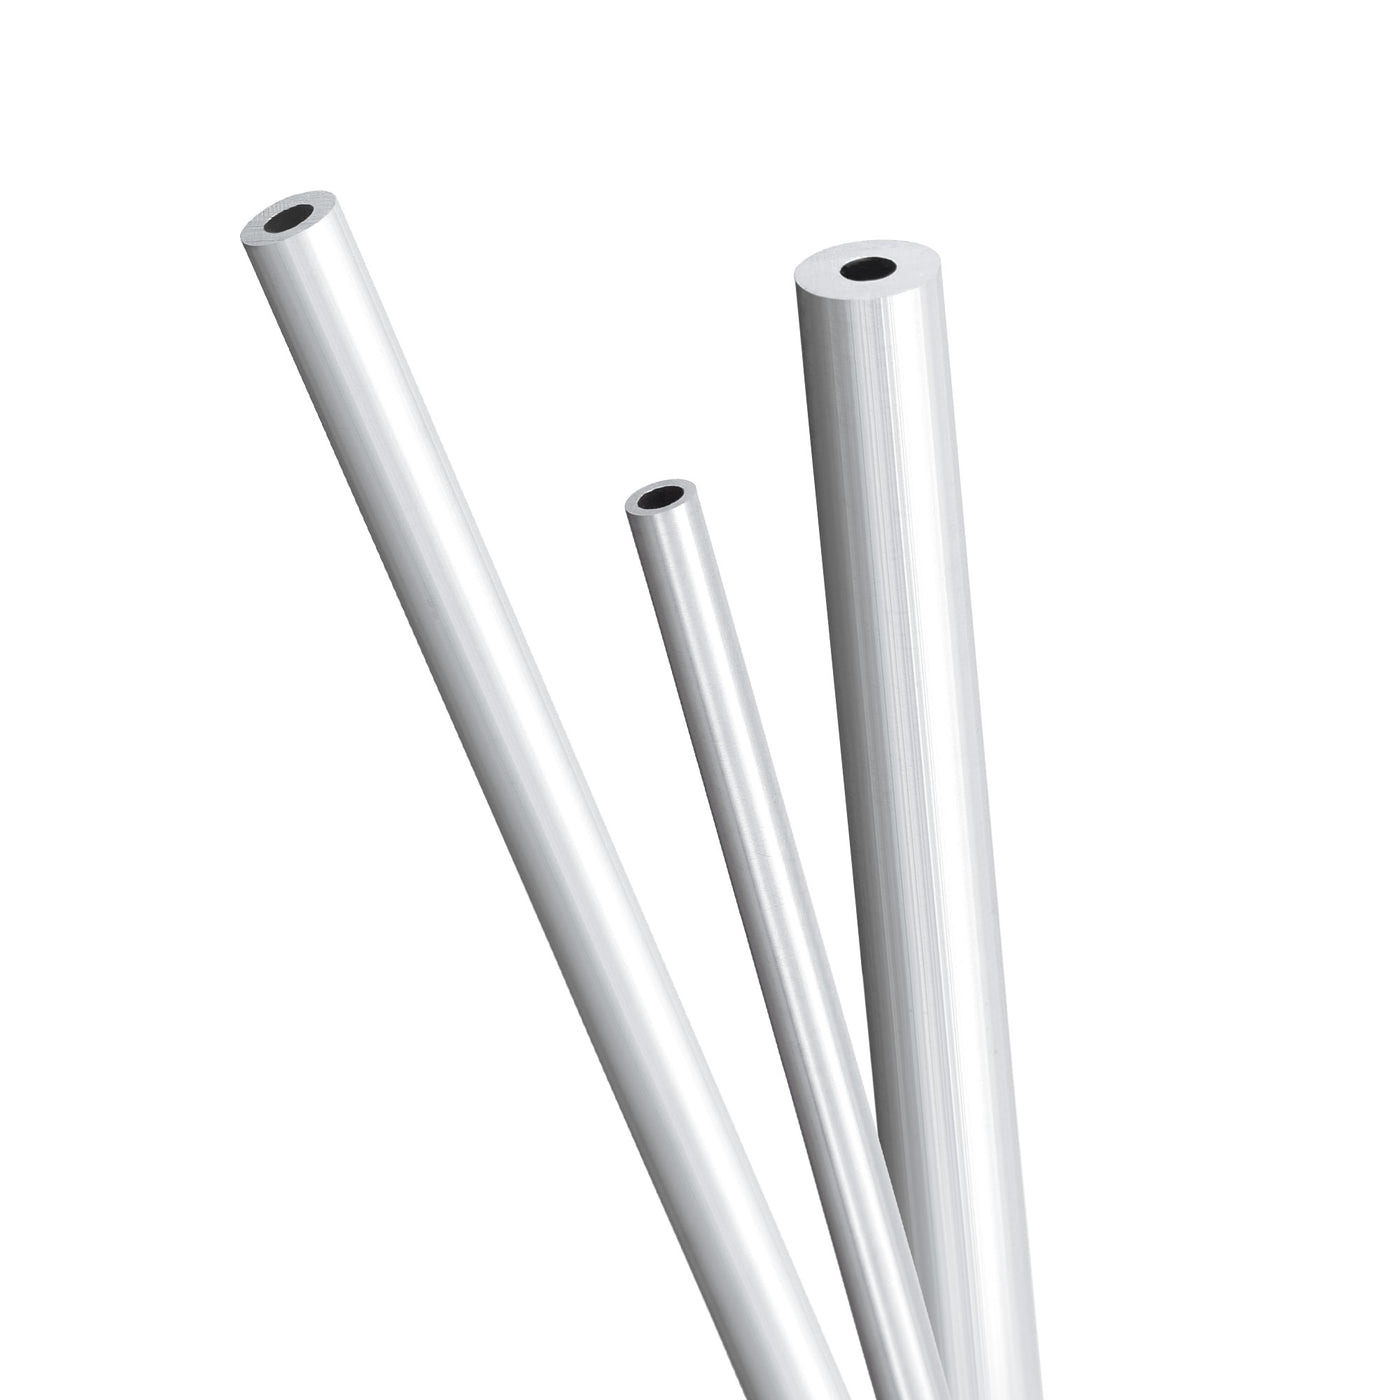 uxcell Uxcell 6063 Aluminum Tube, 3mm 4mm 5mm OD x 2mm Inner Dia 300mm Length Seamless Round Pipe Tubing, Pack of 3